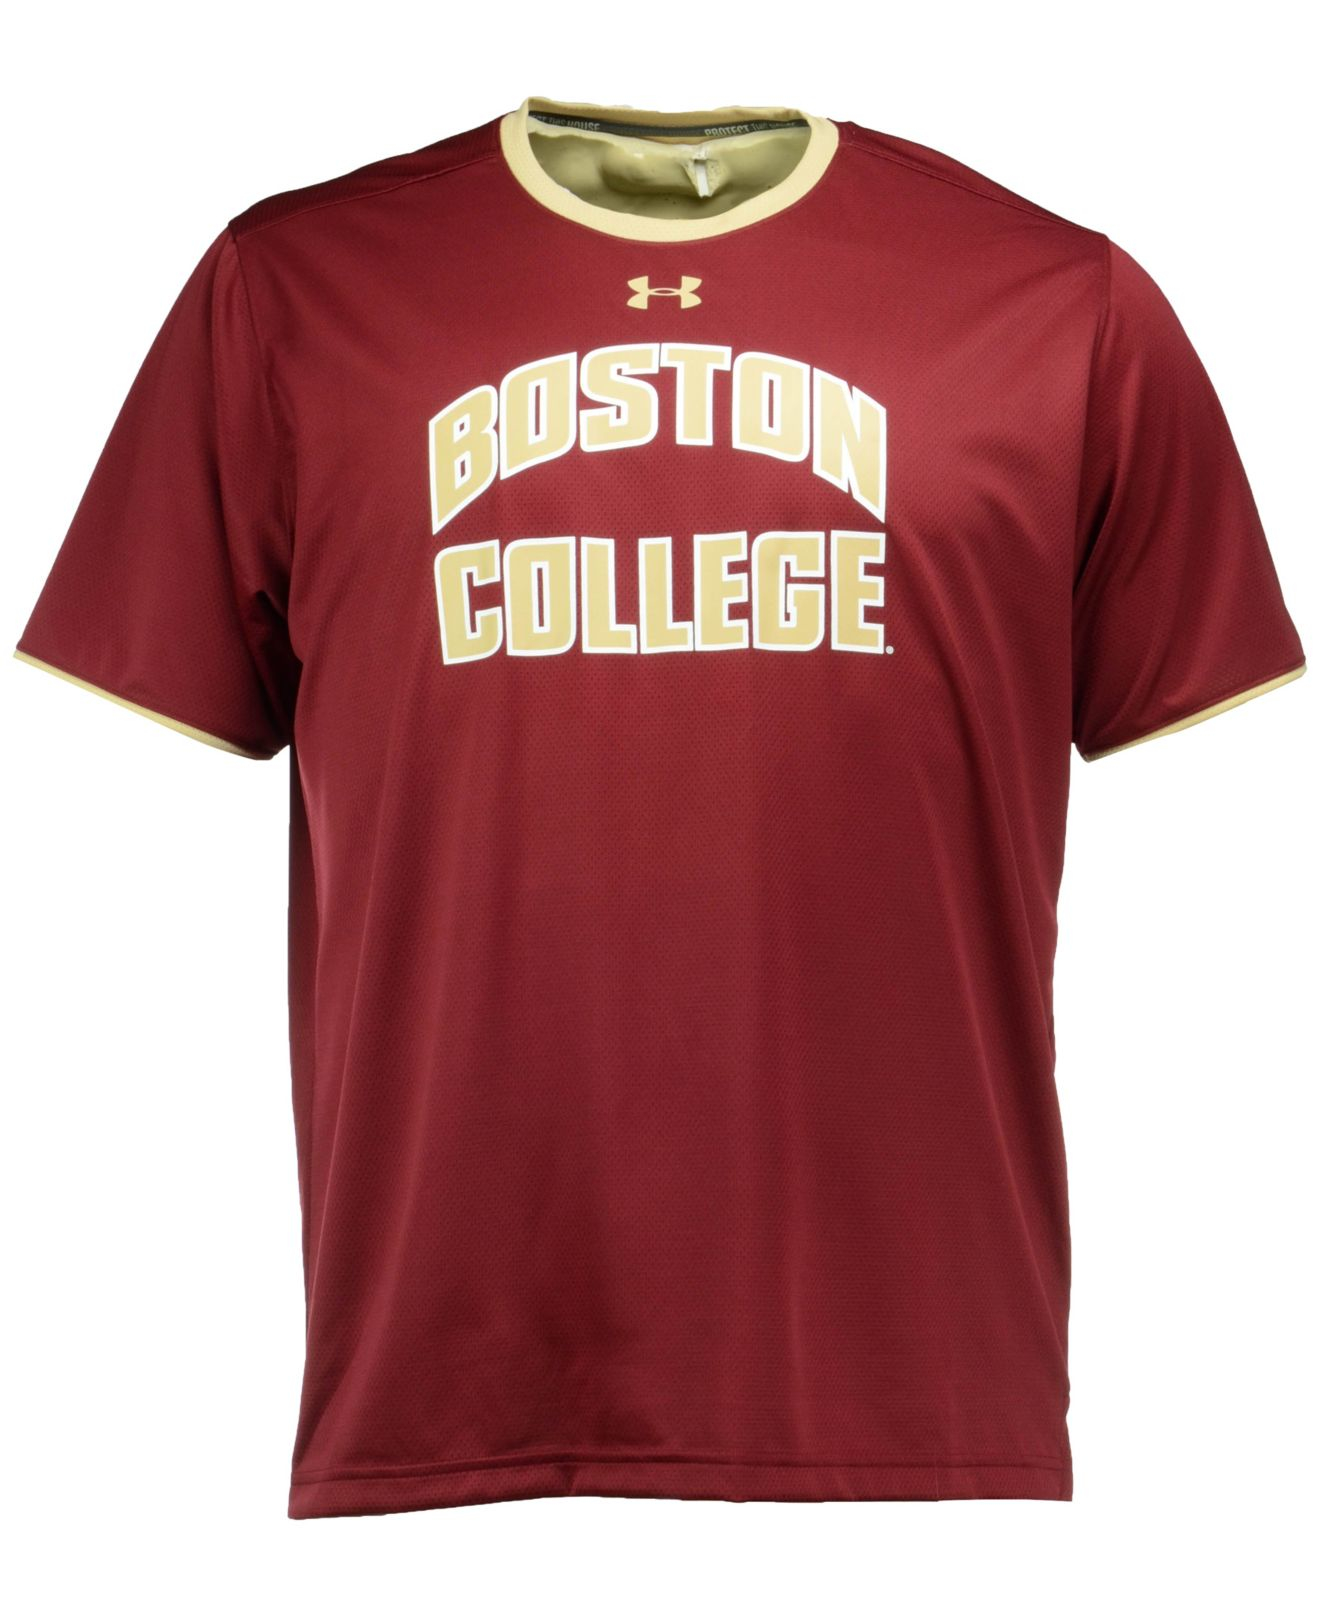 Under armour Men's Big And Tall Boston College Eagles Huddle T-shirt in ...